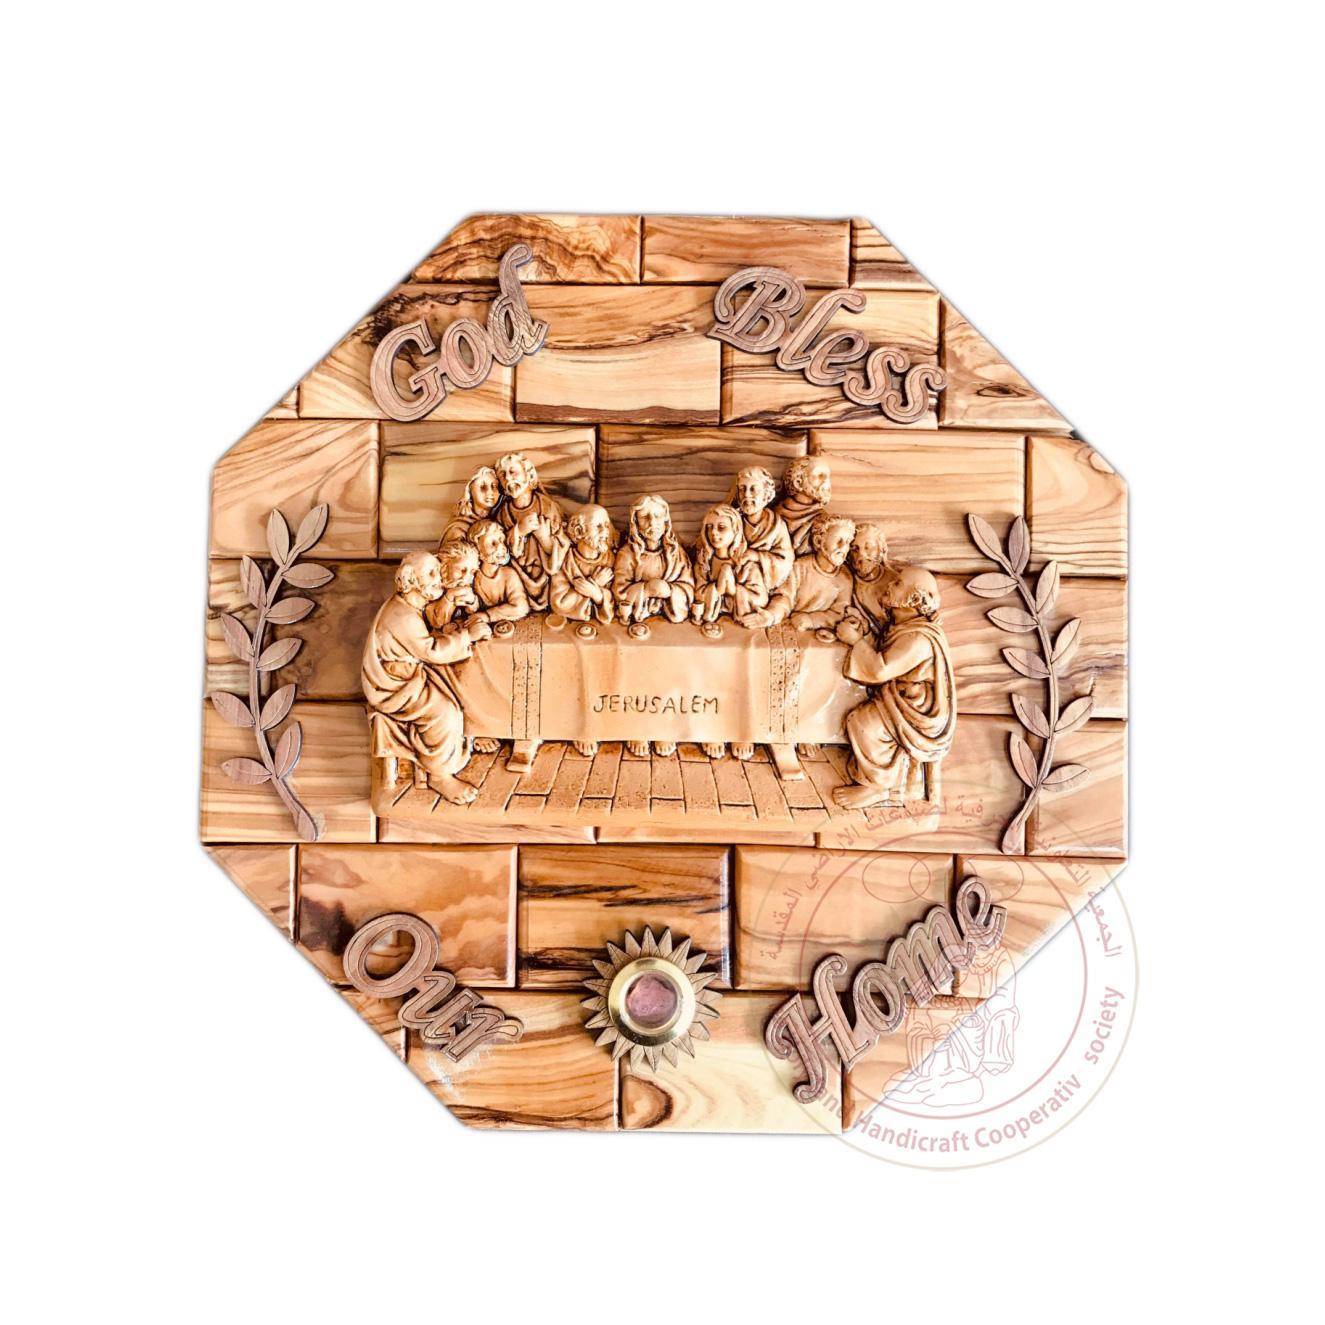 God Bless our Home' Plaque w/Last Supper & Inlaid Incense - Olive Wood & Gypsum Relief